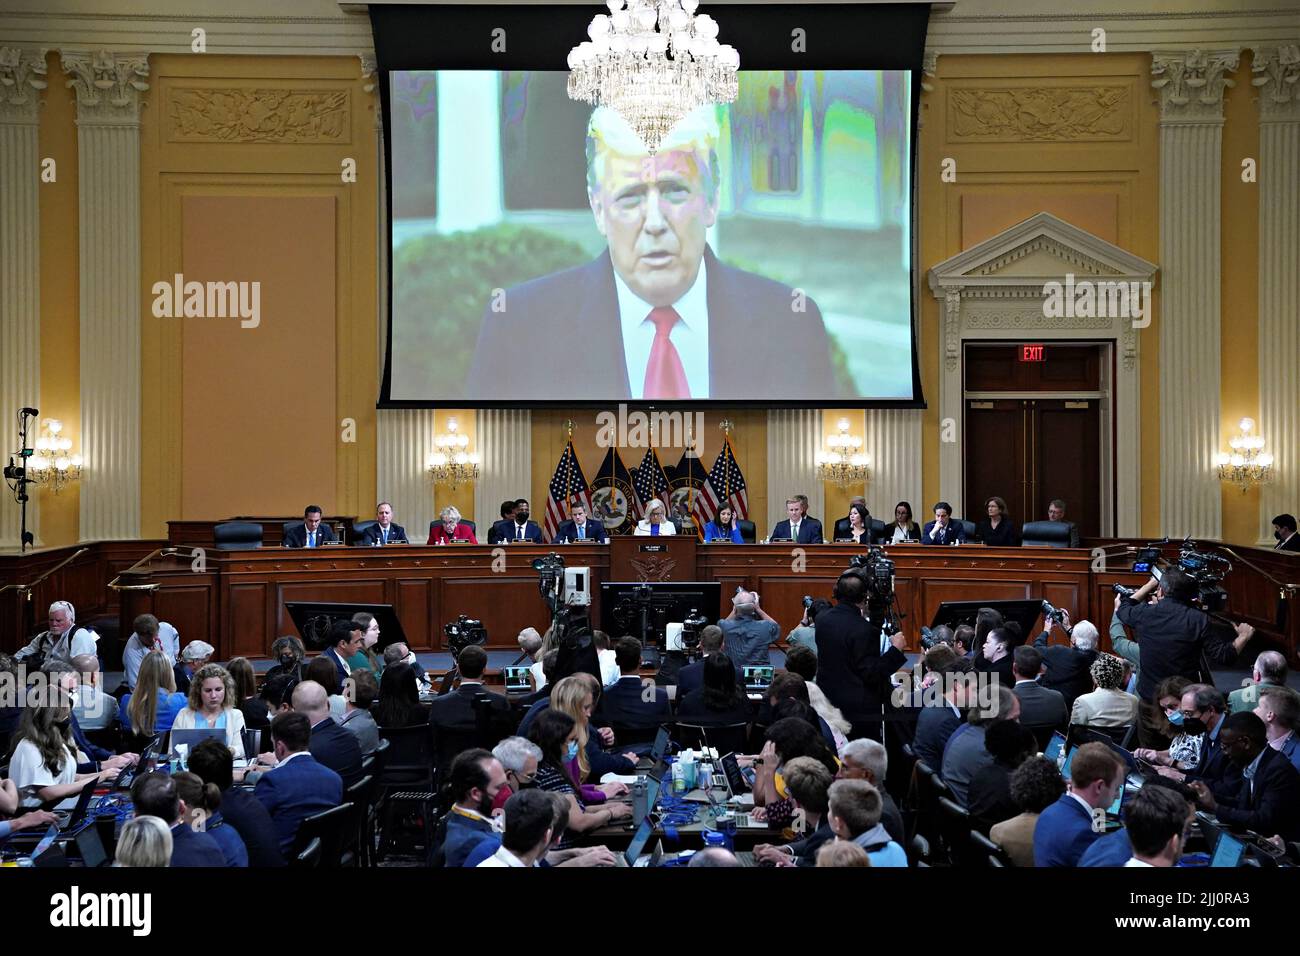 Former US President Donald Trump displayed on a screen during a hearing of the Select Committee to Investigate the January 6th Attack on the US Capitol in Washington, D.C., US, on Thursday, July 21, 2022.  Al Drago/Pool via REUTERS Stock Photo